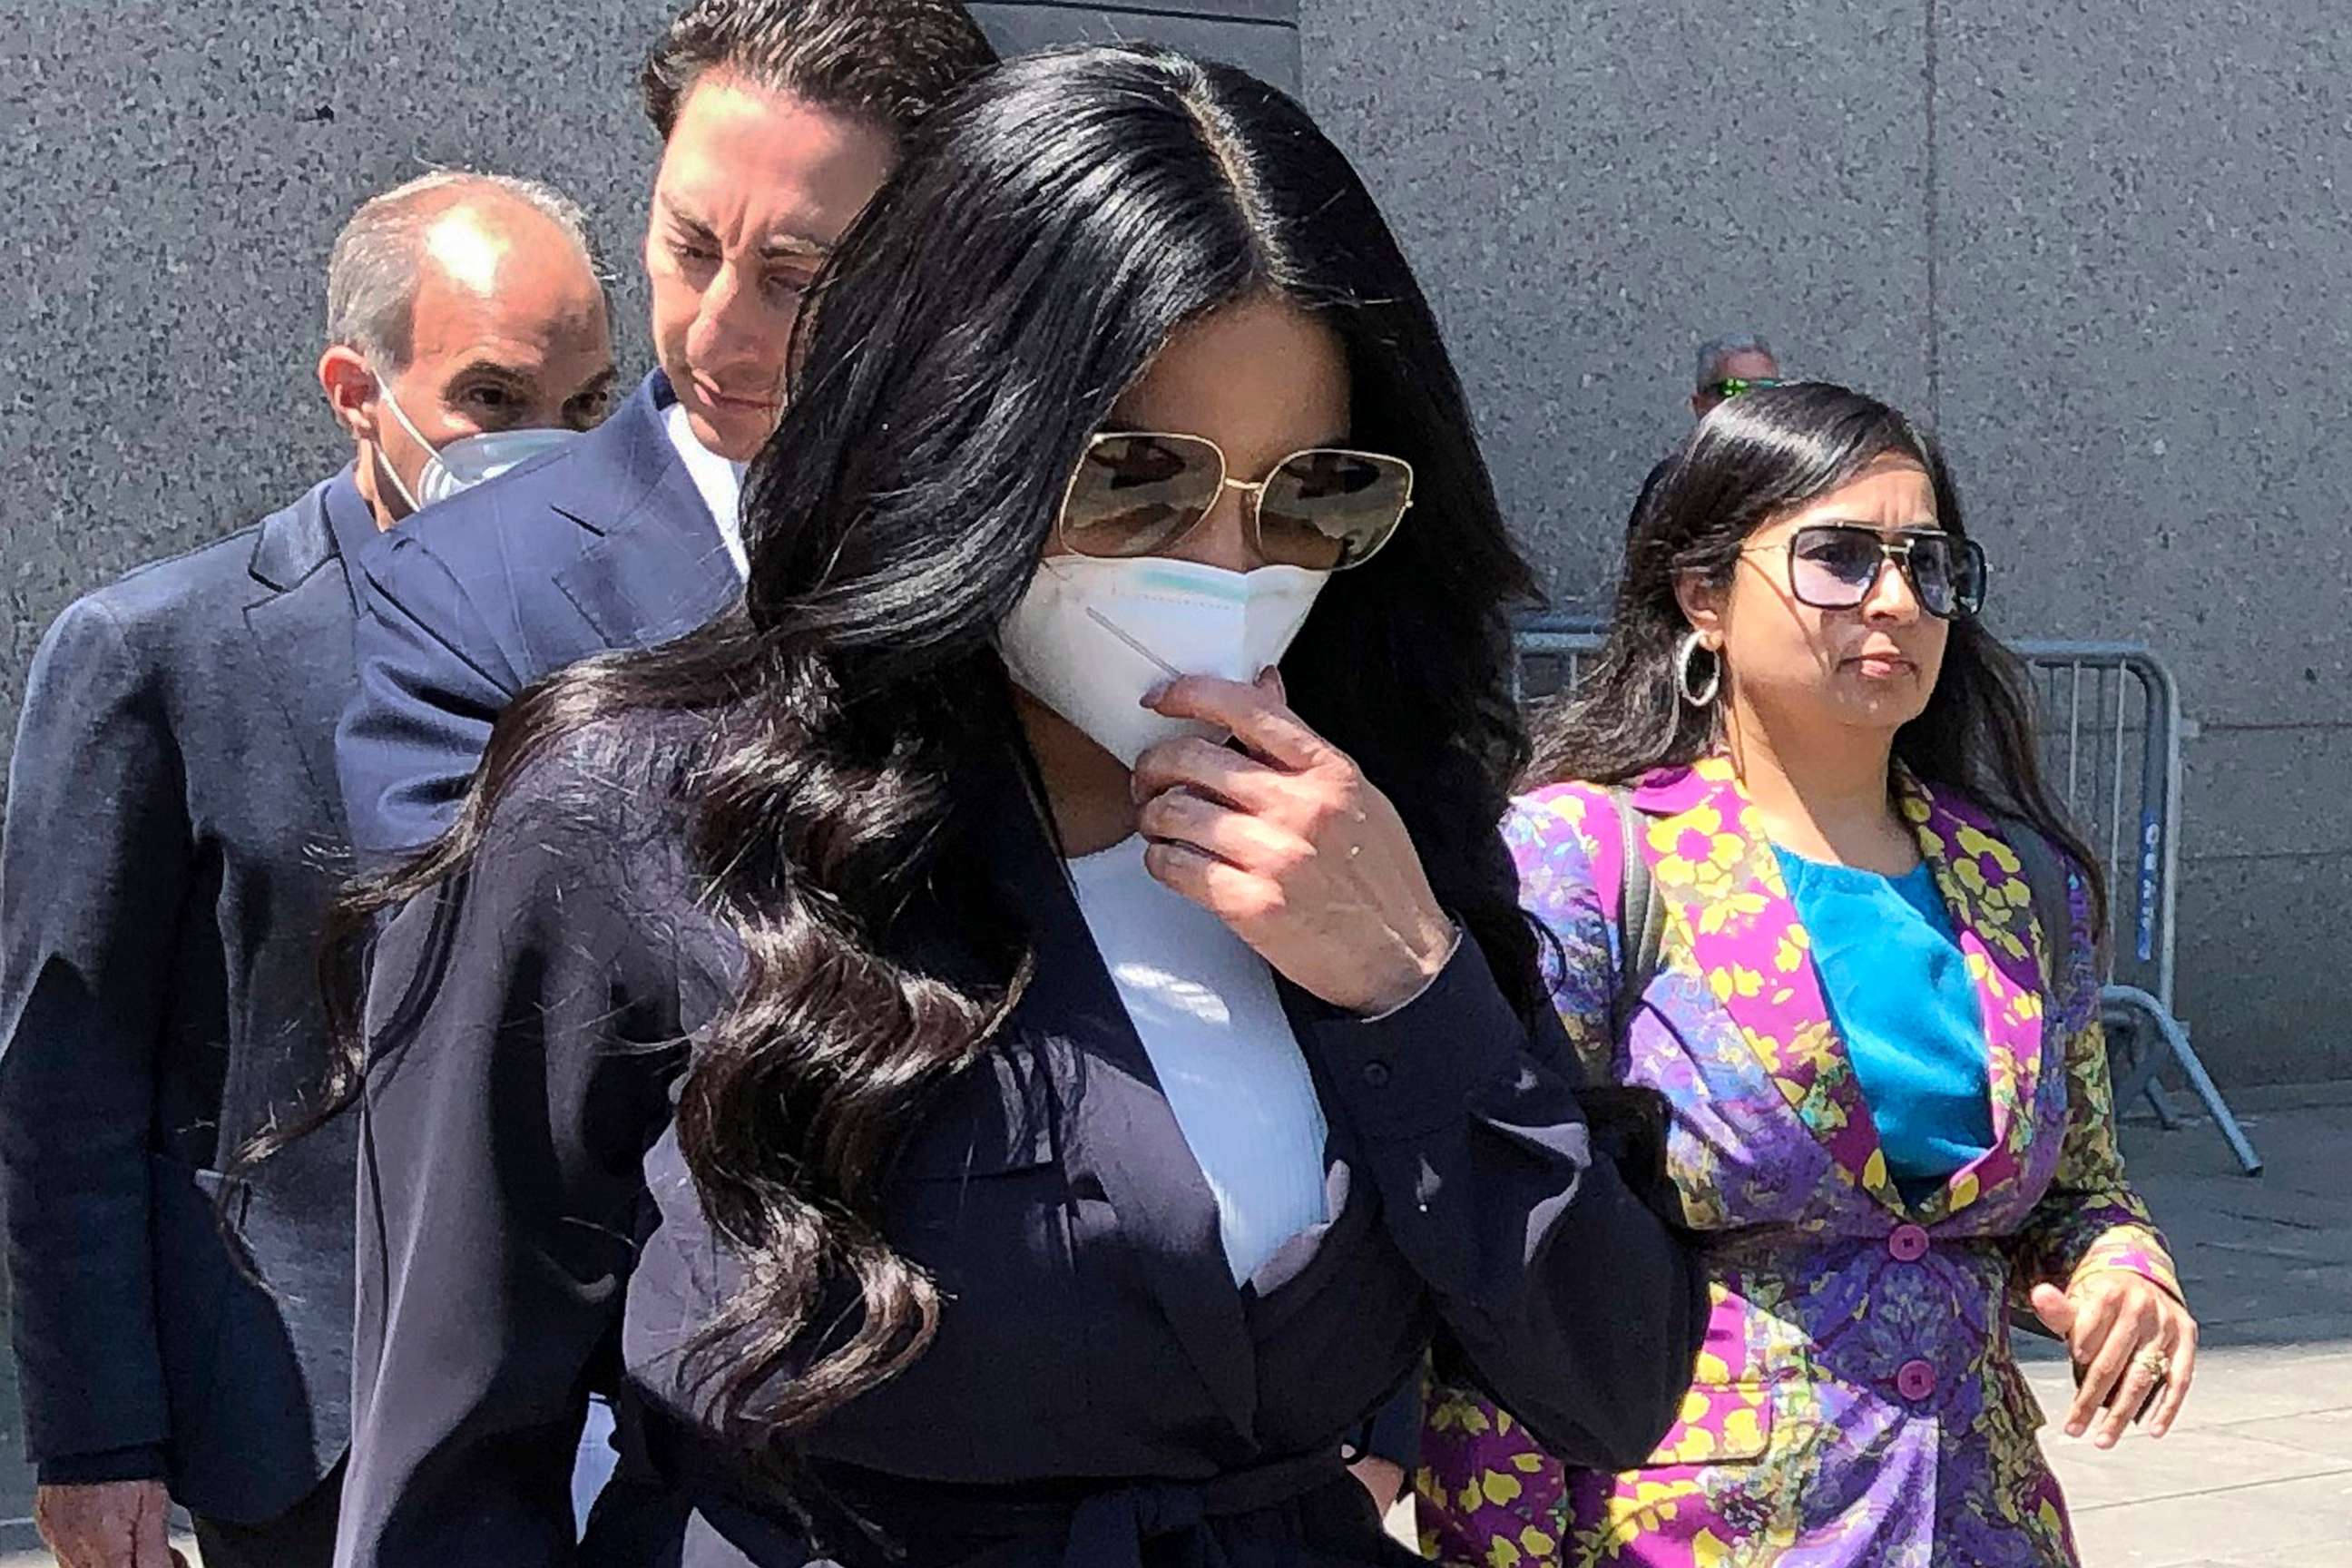 PHOTO: Jennifer Shah, center, of "The Real Housewives of Salt Lake City" reality television series leaves Manhattan federal court, after pleading guilty to wire fraud conspiracy, in New York, July 11, 2022.